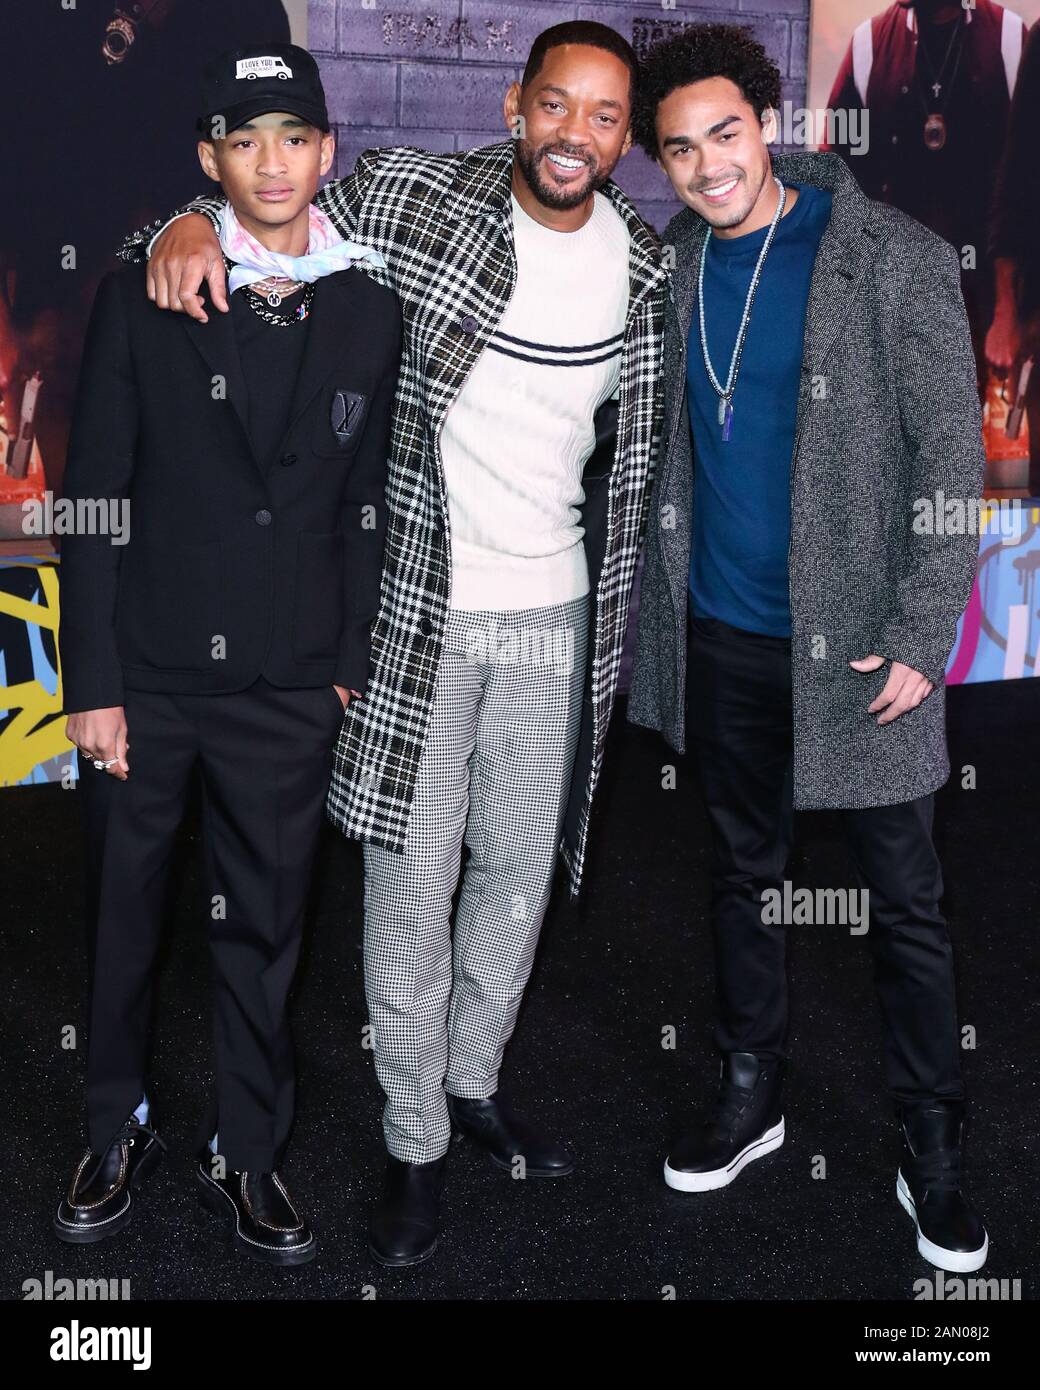 Hollywood, United States. 14th Jan, 2020. HOLLYWOOD, LOS ANGELES,  CALIFORNIA, USA - JANUARY 14: Jaden Smith, Will Smith and Trey Smith arrive  at the Los Angeles Premiere Of Columbia Pictures' 'Bad Boys